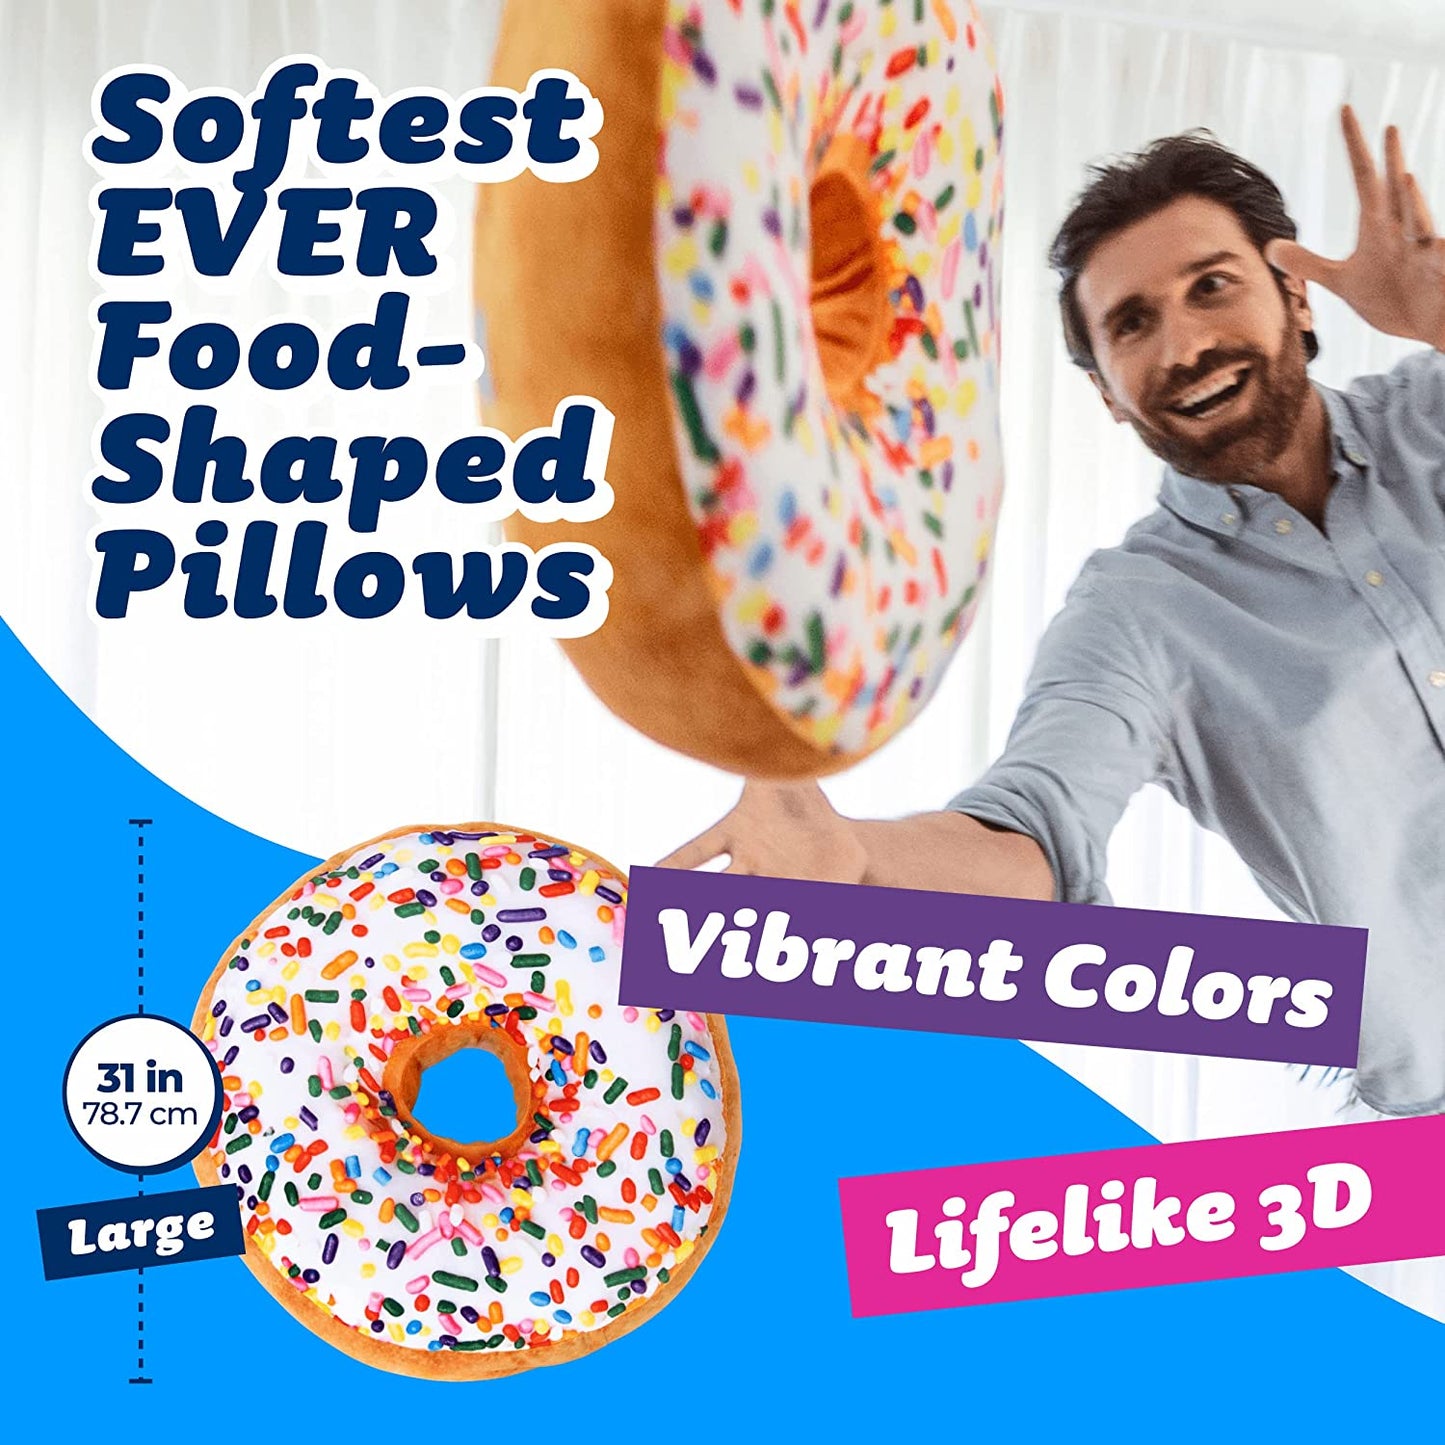 Product details about a donut shaped pillow.